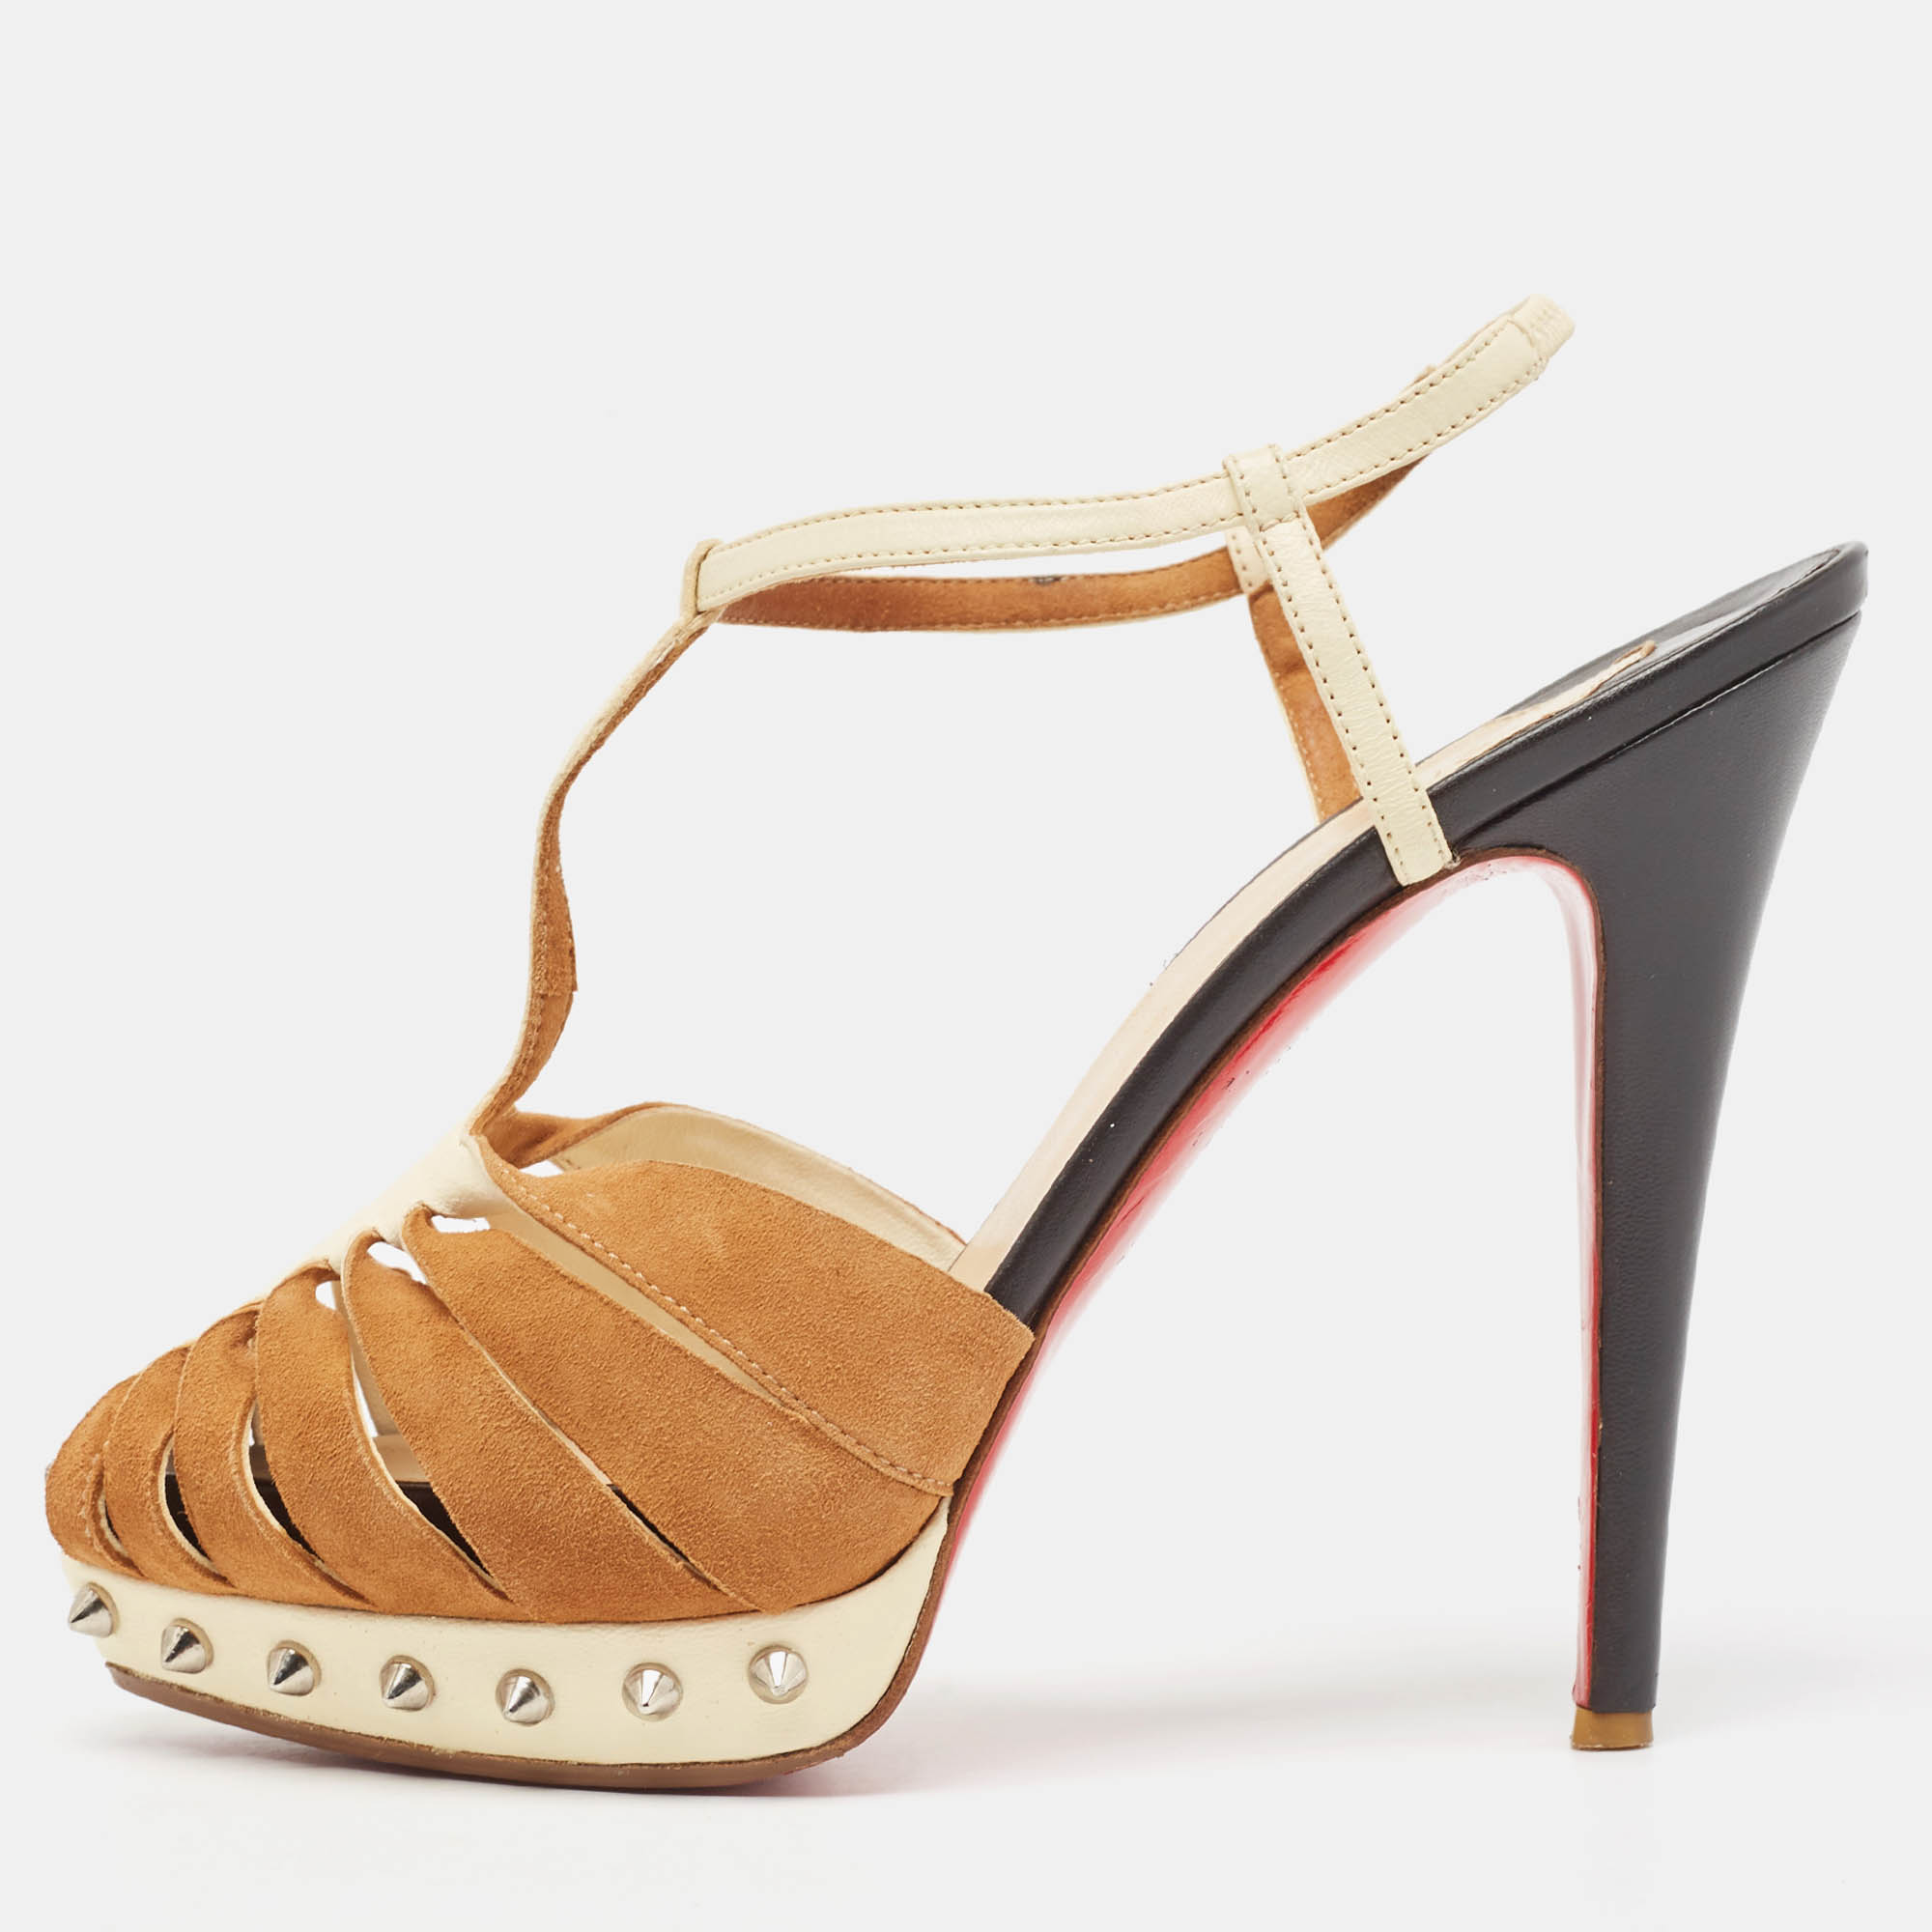 Christian louboutin brown/beige suede and leather zigounette spiked sandals size 38